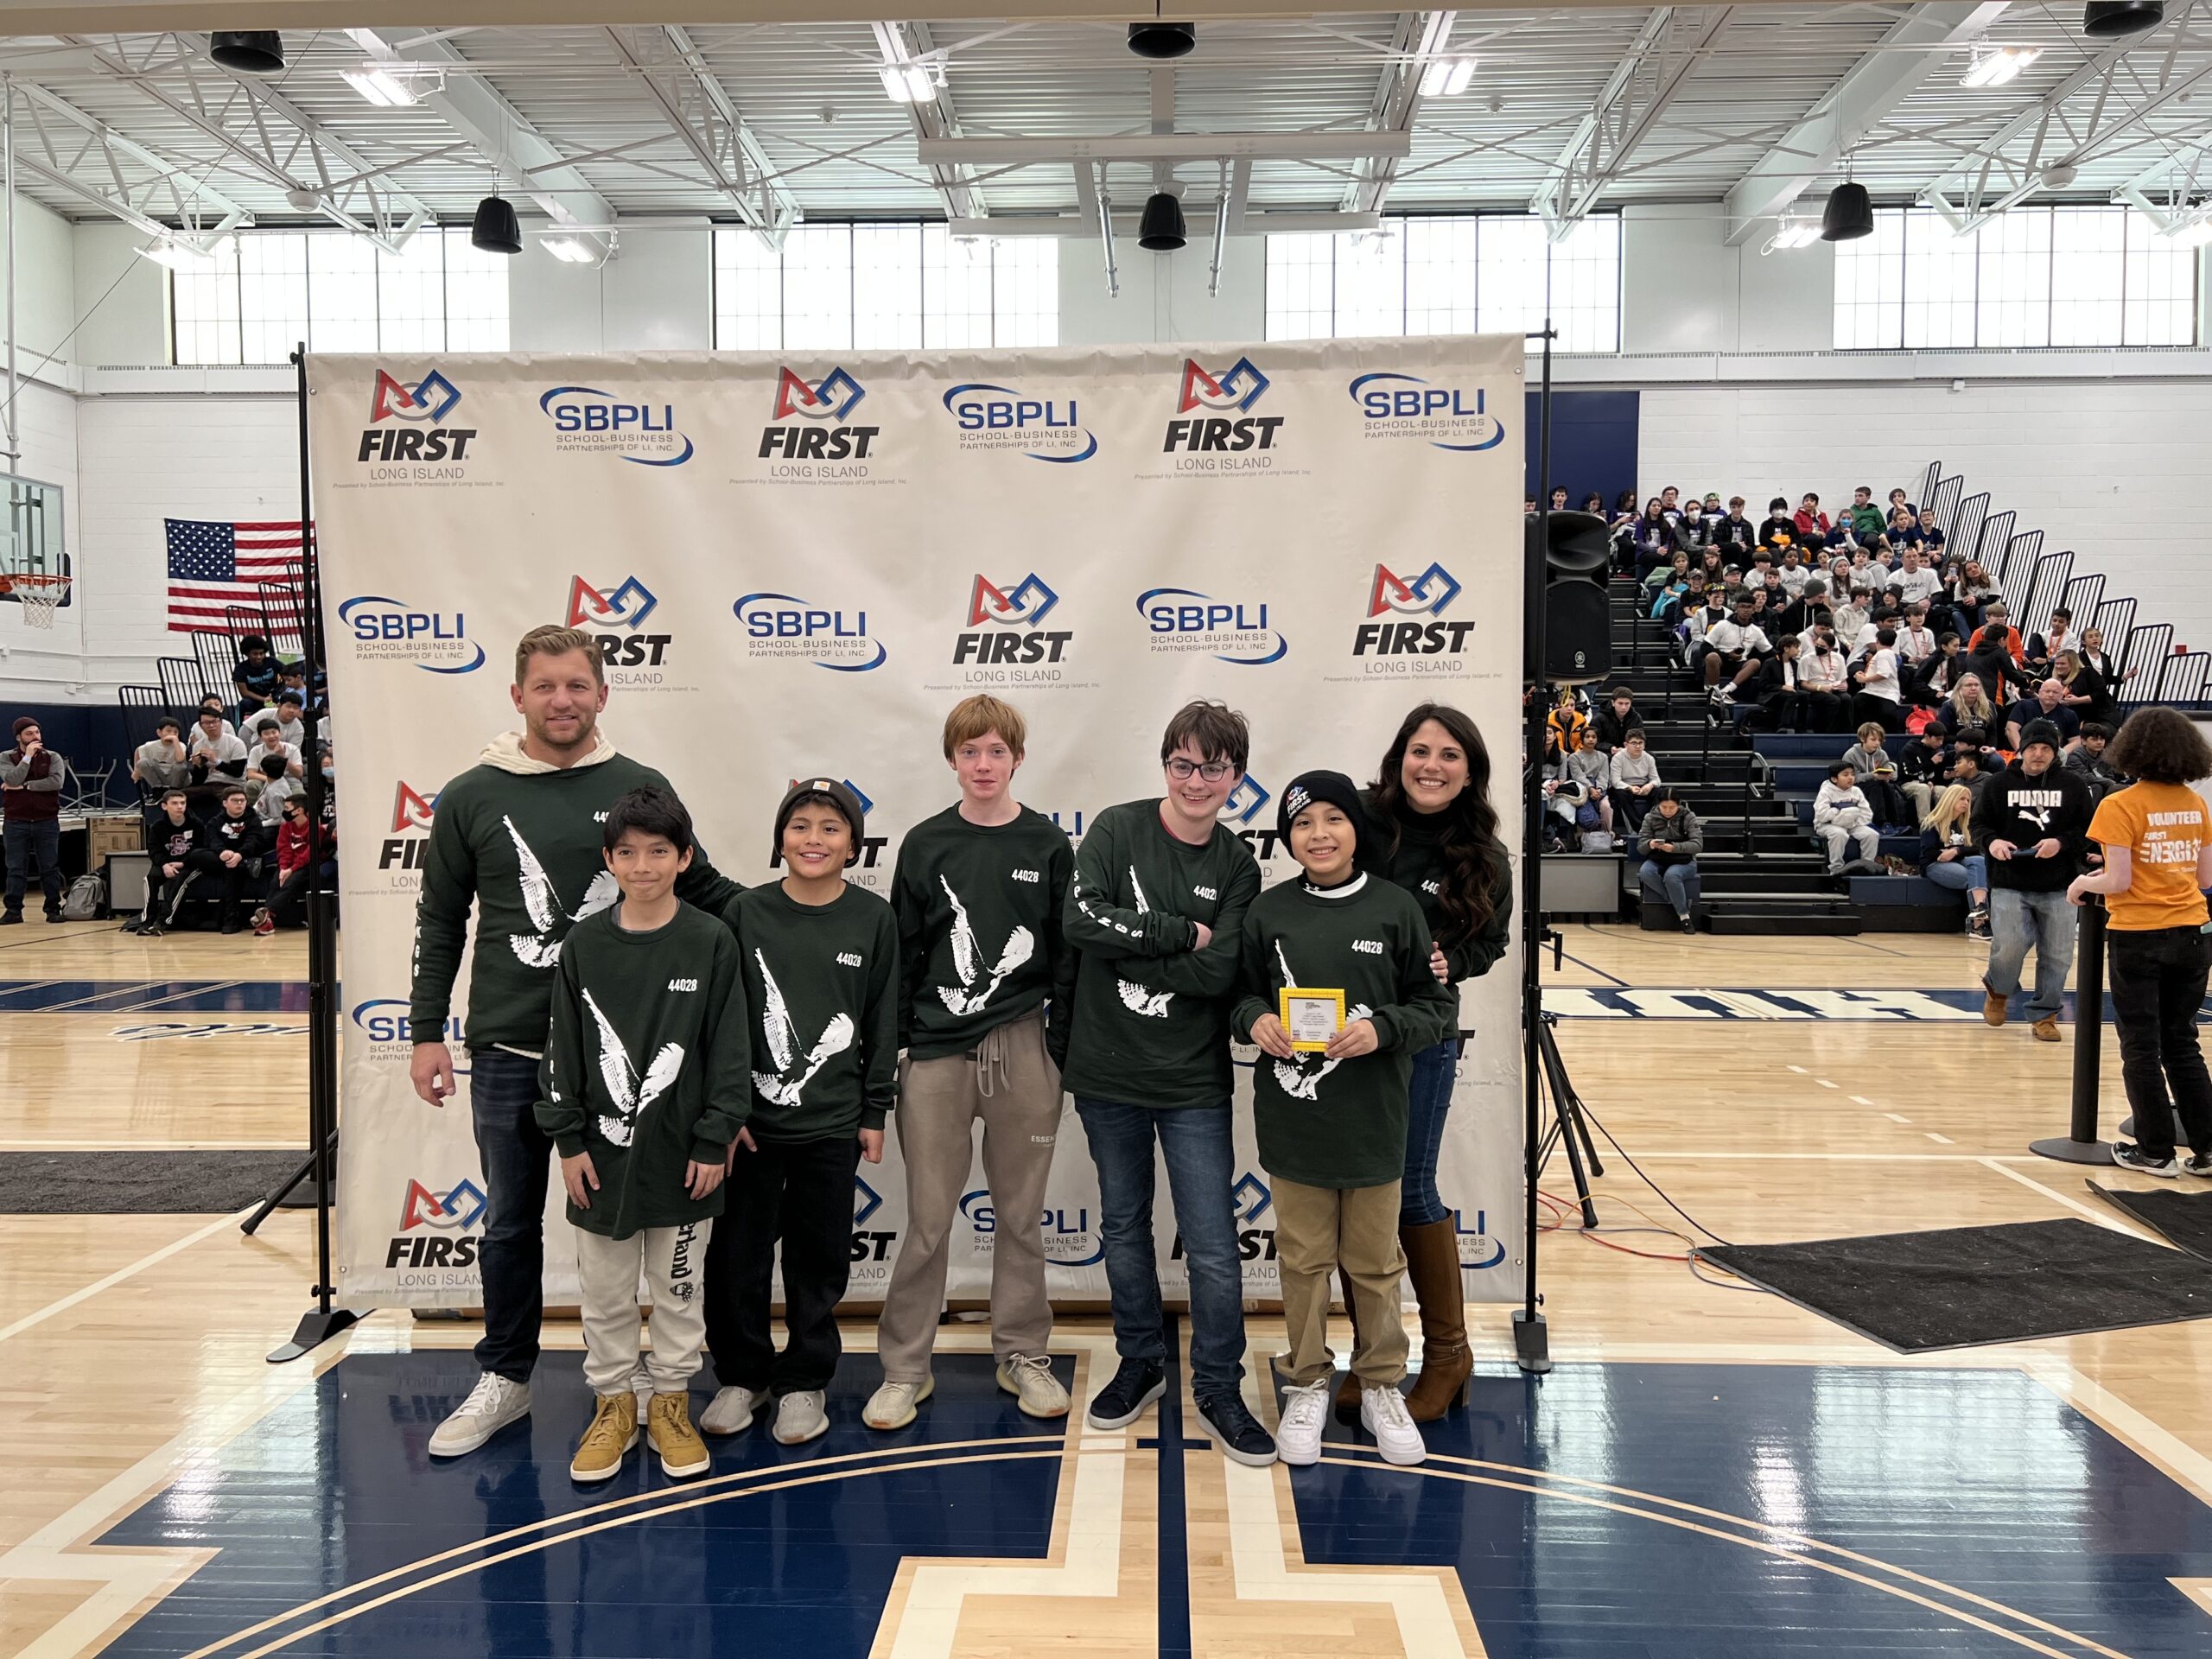 Springs School's robotics team the Lightning Bots won the engineering award at the FIRST Lego League qualifier at Huntington High School January 21. SPRINGS SCHOOL DISTRICT